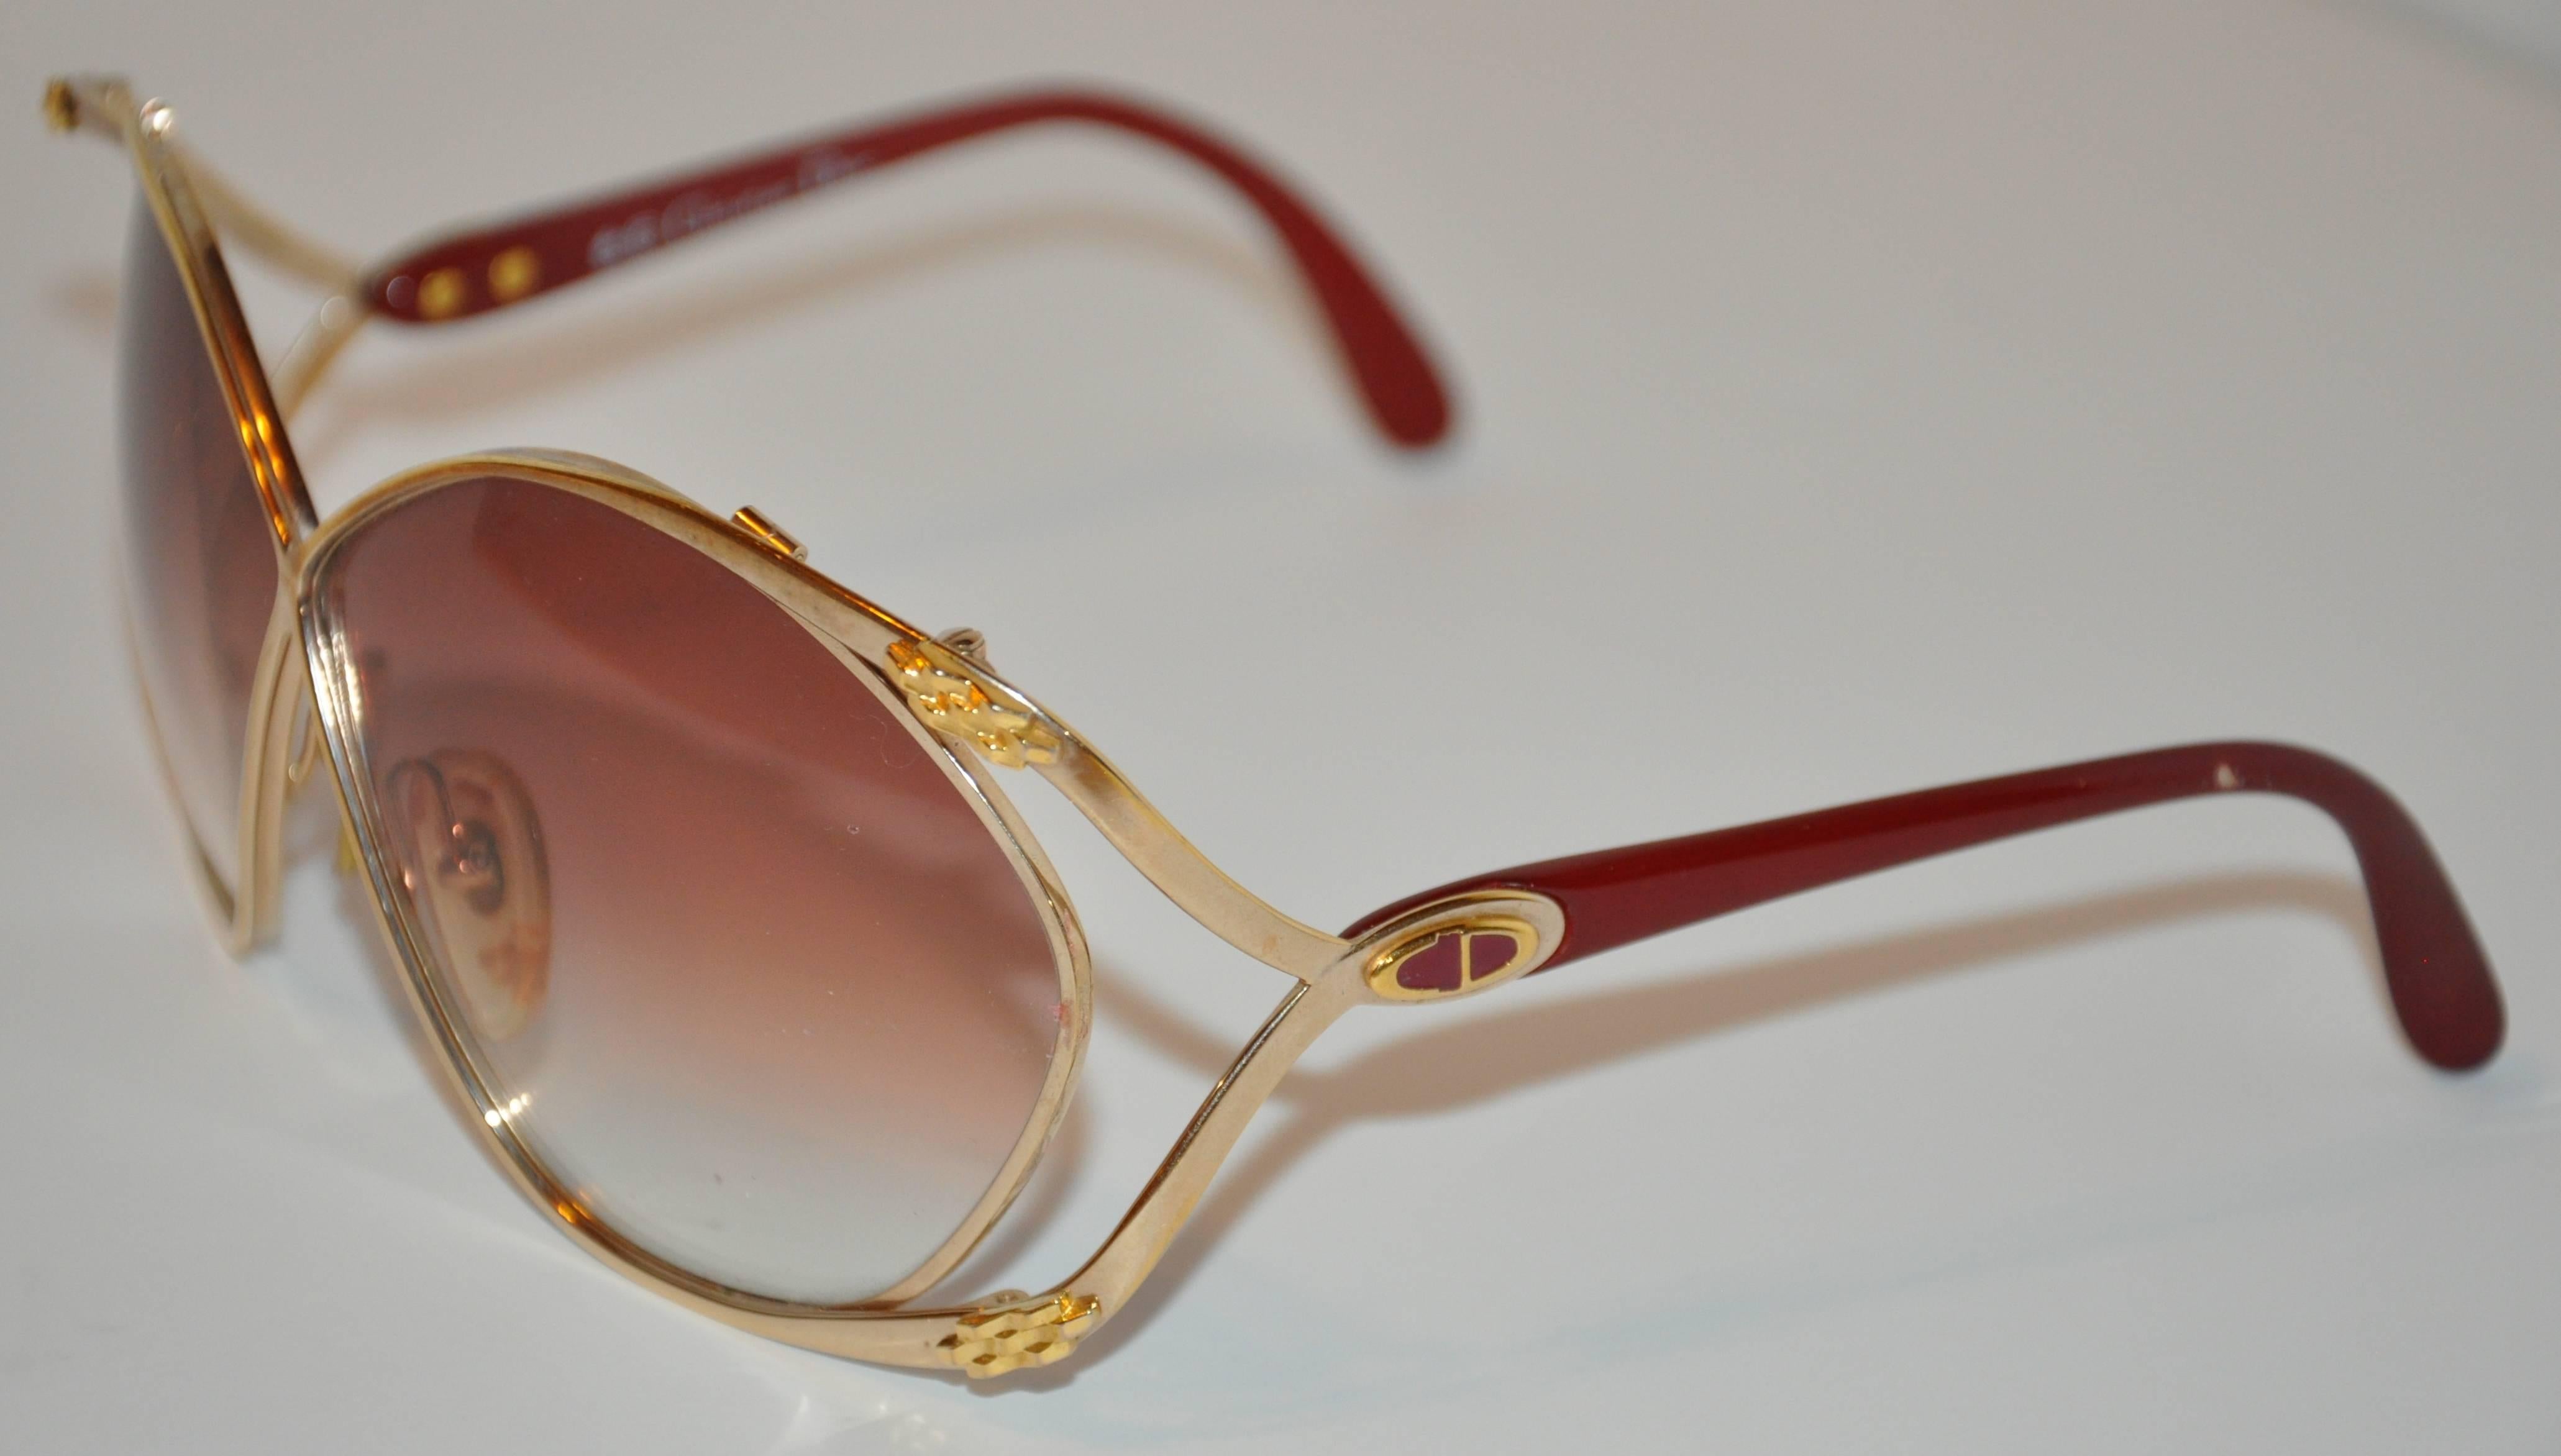        Christian Dior huge polished gold hardware frames are accented with "Chain-Links" on the front corners. The arms are curved into a single arm and finished with burgundy lucite along the tips. Their signature "CD"